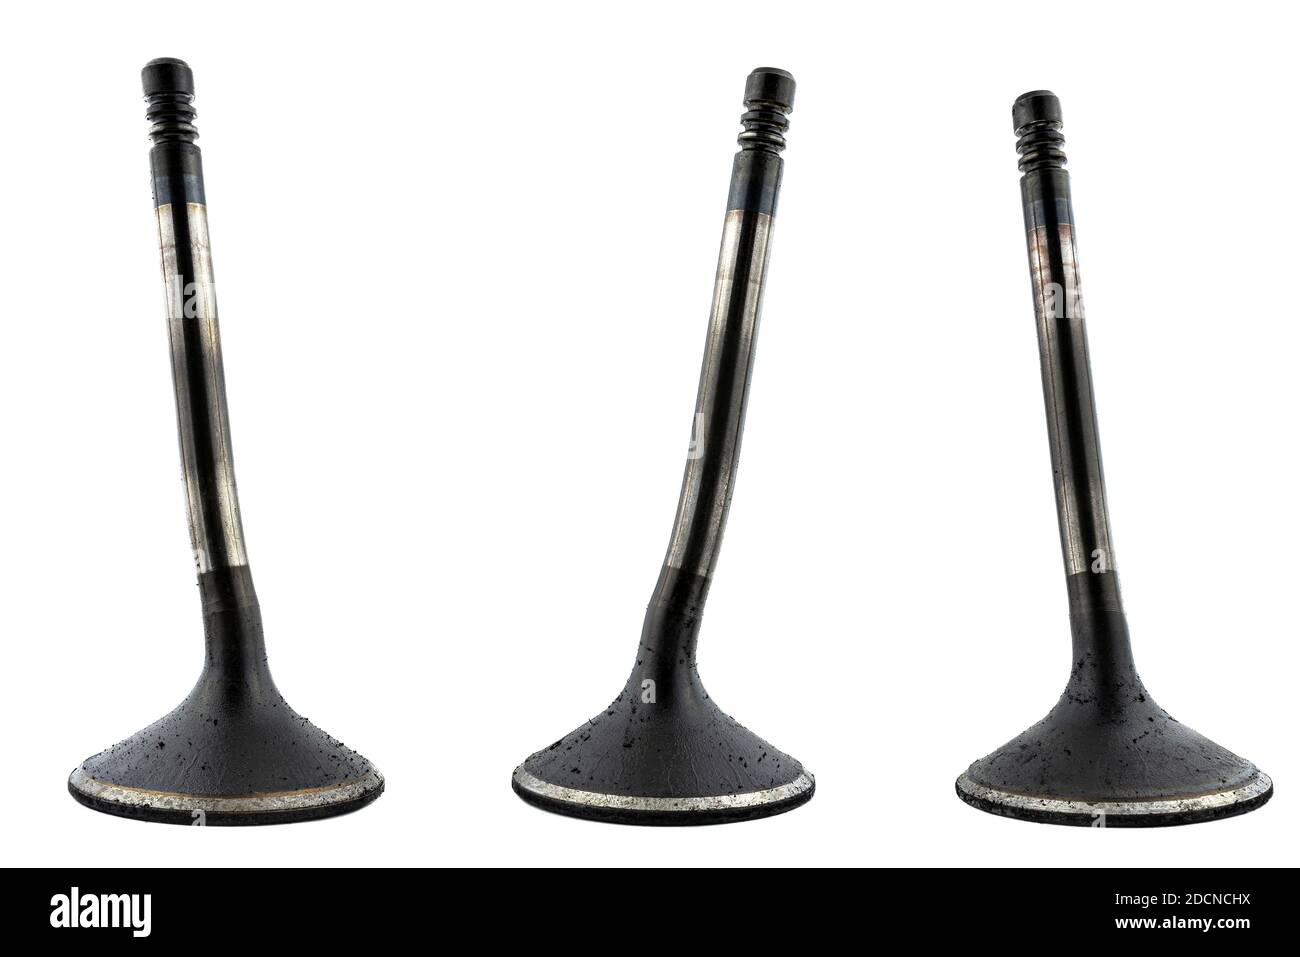 Warped three engine valves, covered with soot, isolated on a white background. Stock Photo